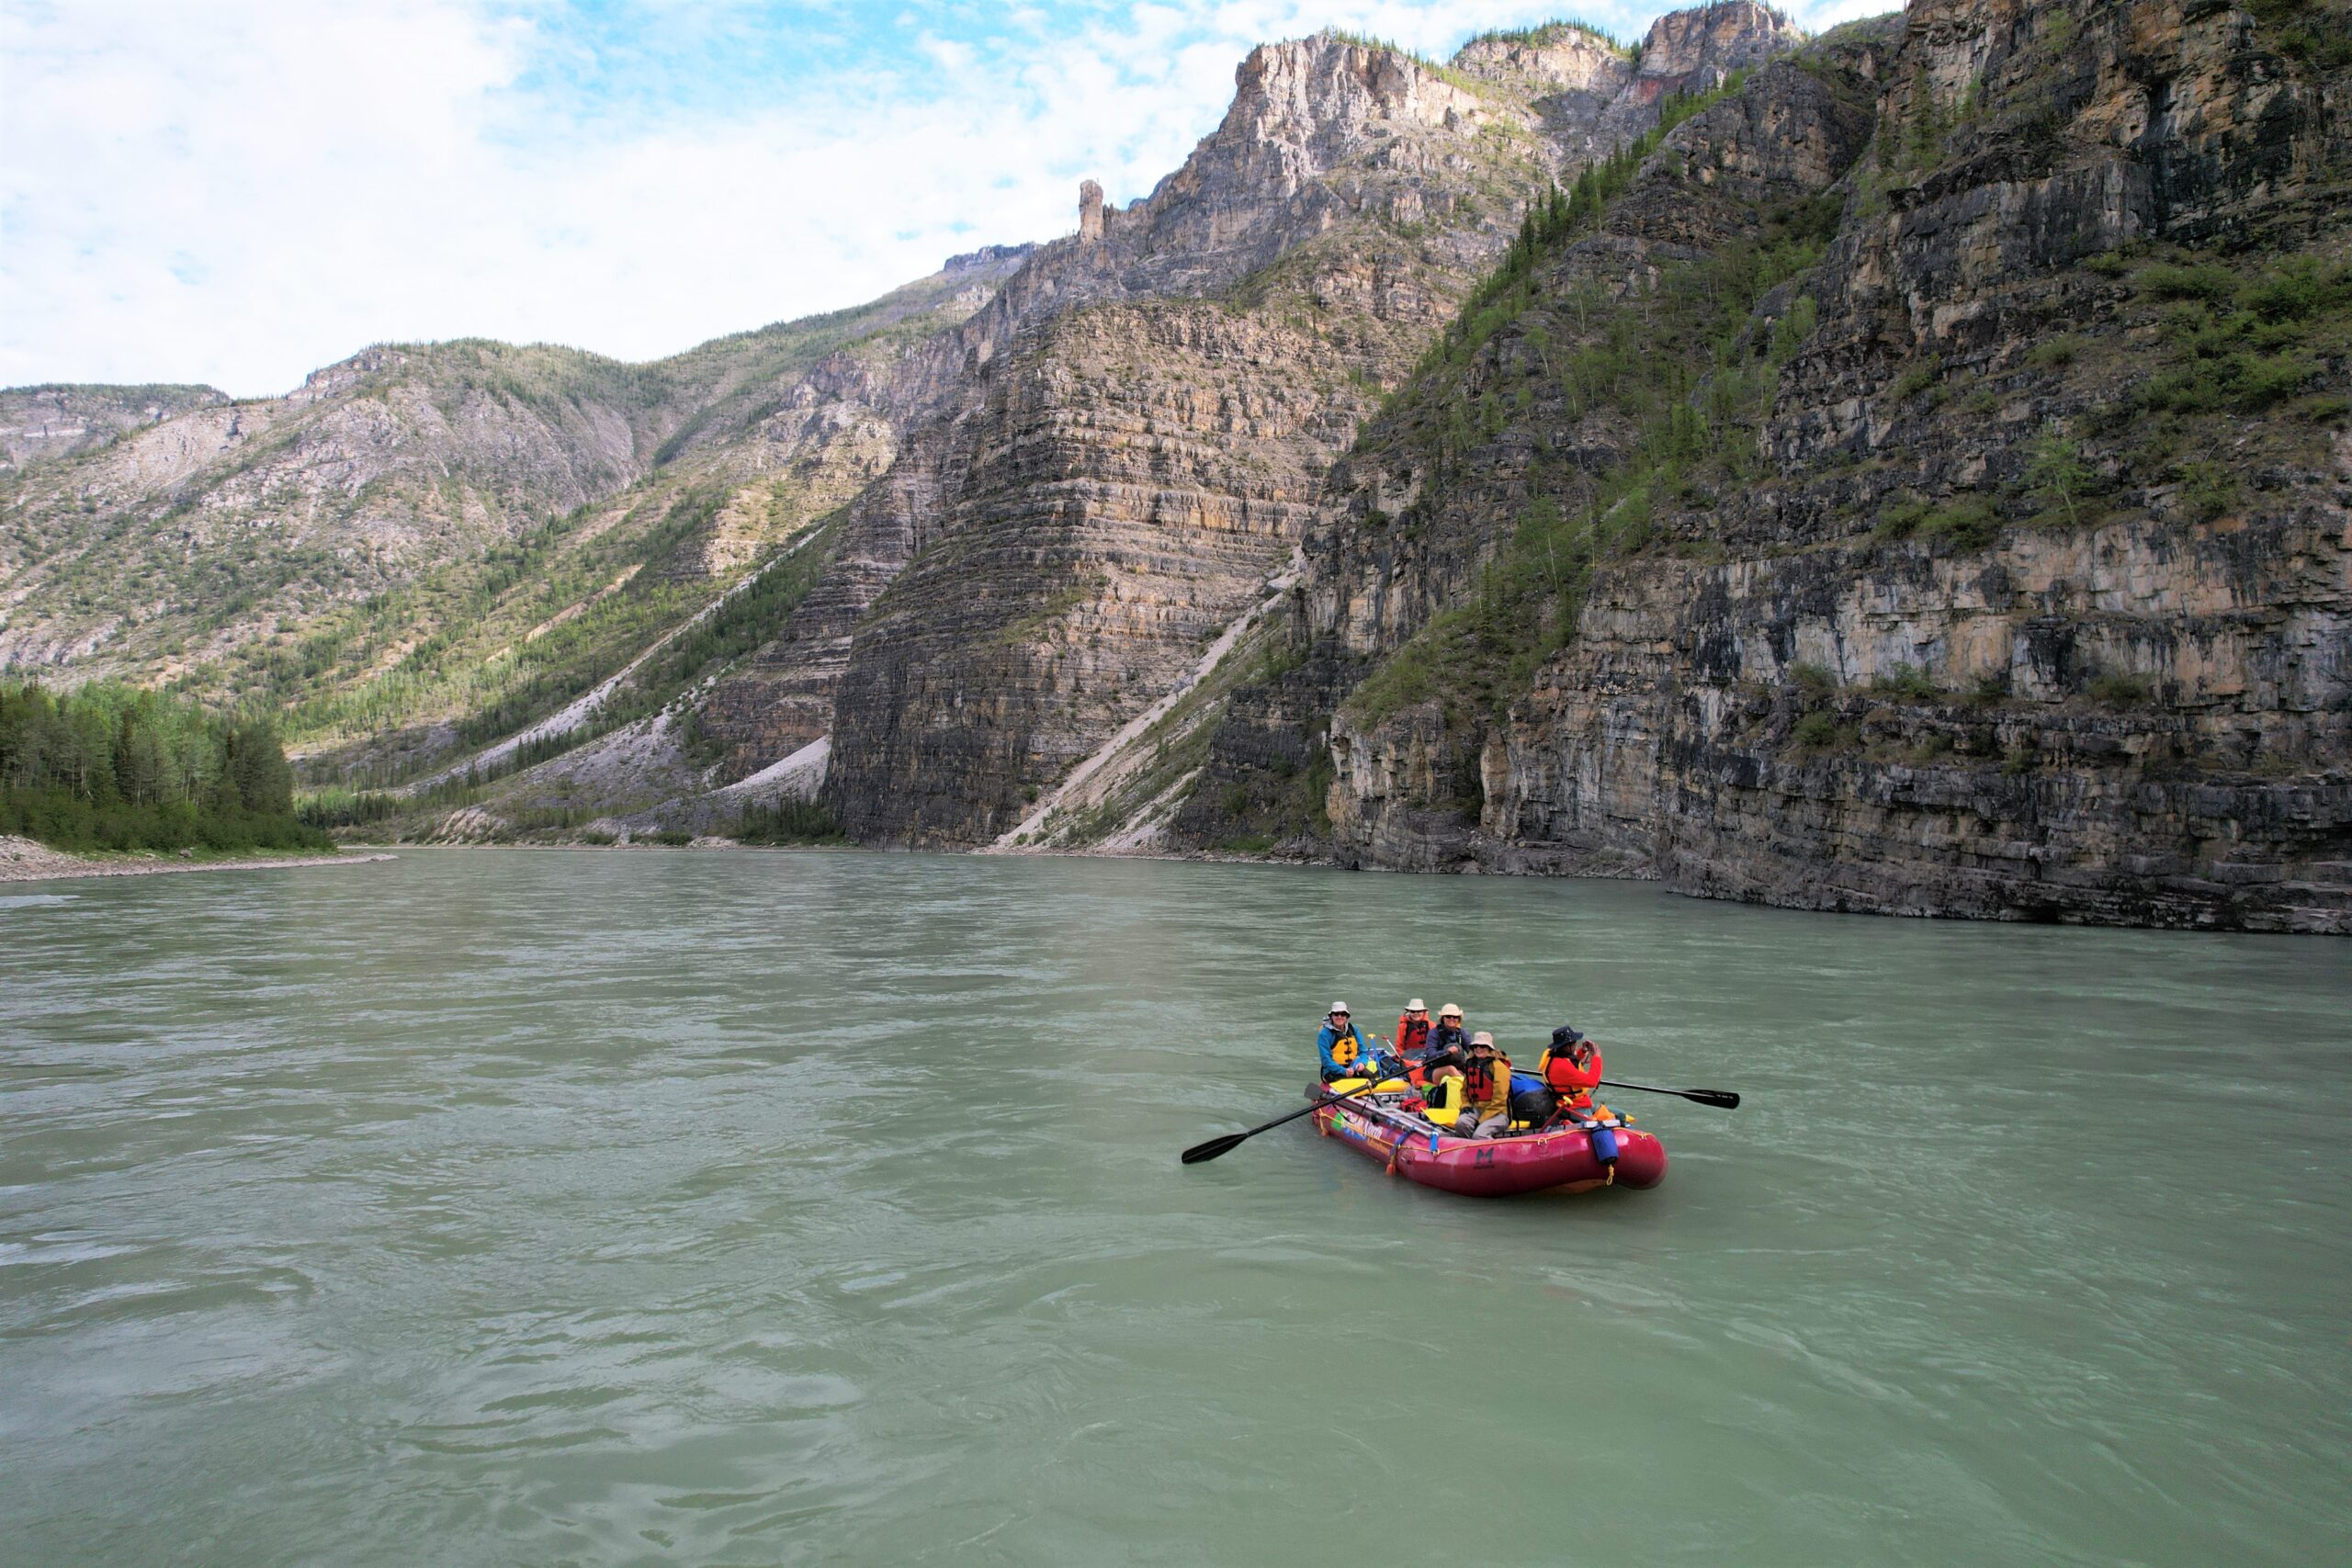 Drone Shot of a raft floating through the Canyons of the Nahanni